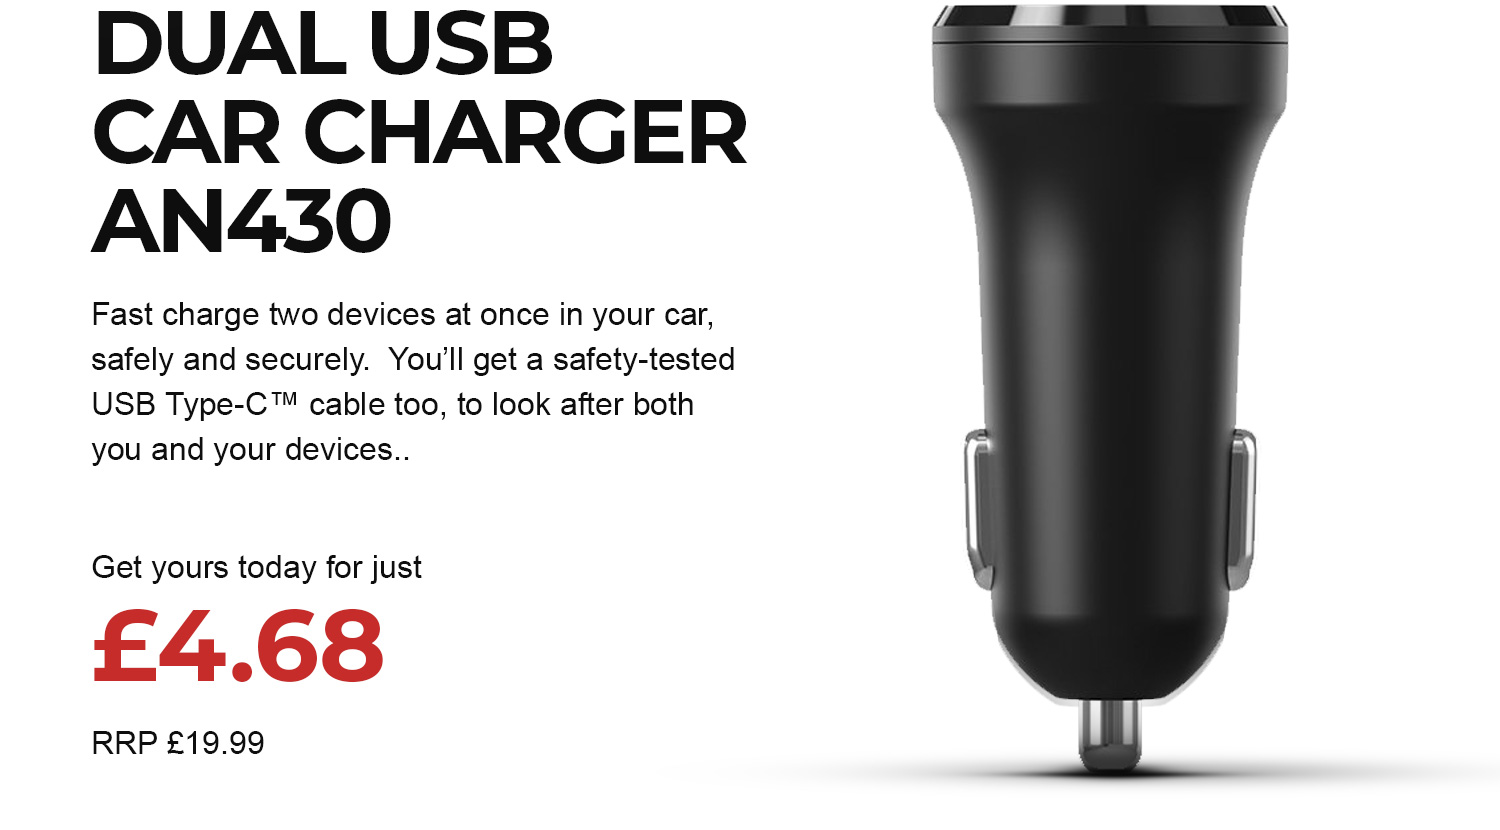 Sony AN430 Duel USB Car Charger